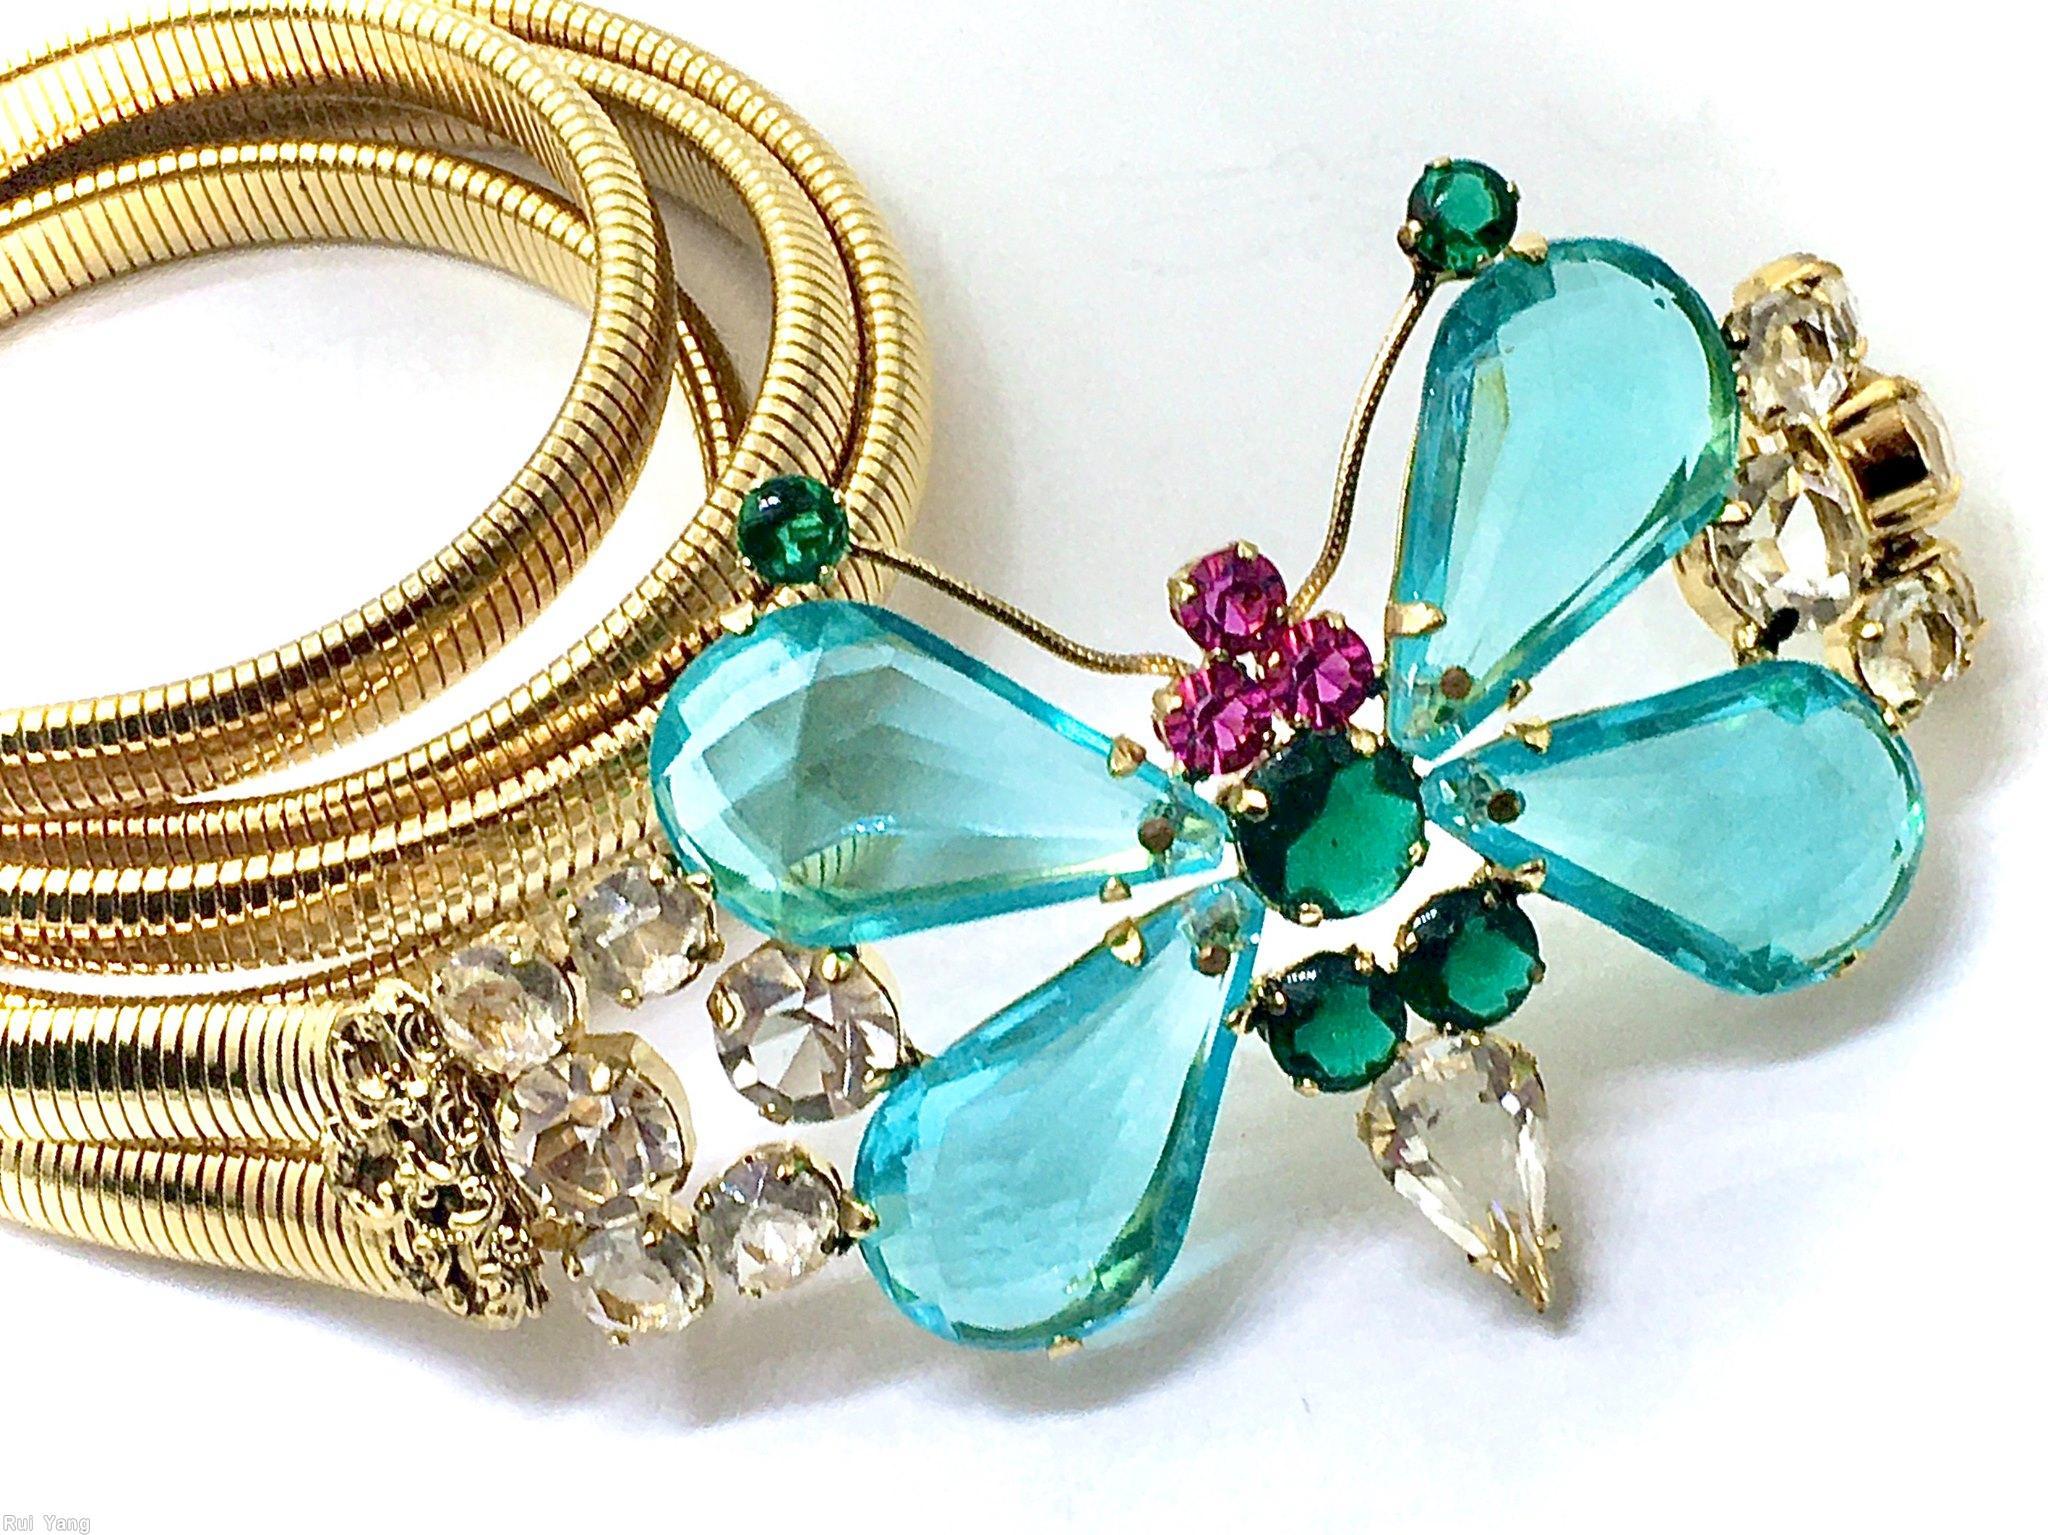 Schreiner butterfly buckle 4 large faceted teardrop teardrop tail clear aqua faceted large teardrop stone clear emerald clear magenta goldtone jewelry